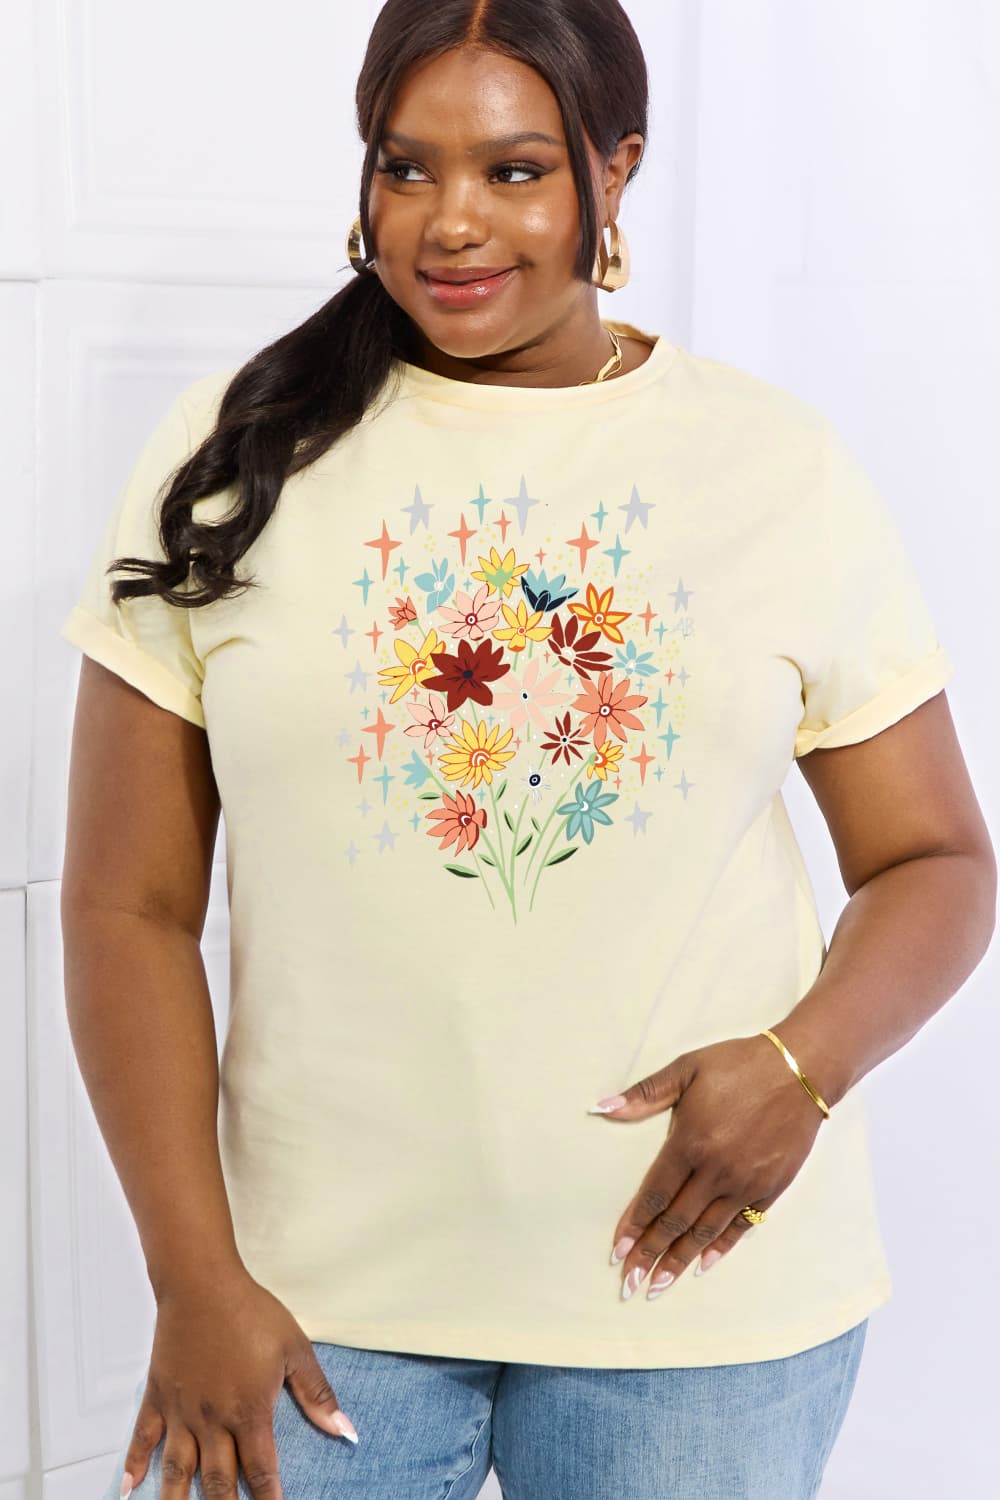 Simply Love Full Size Floral Graphic Cotton Tee